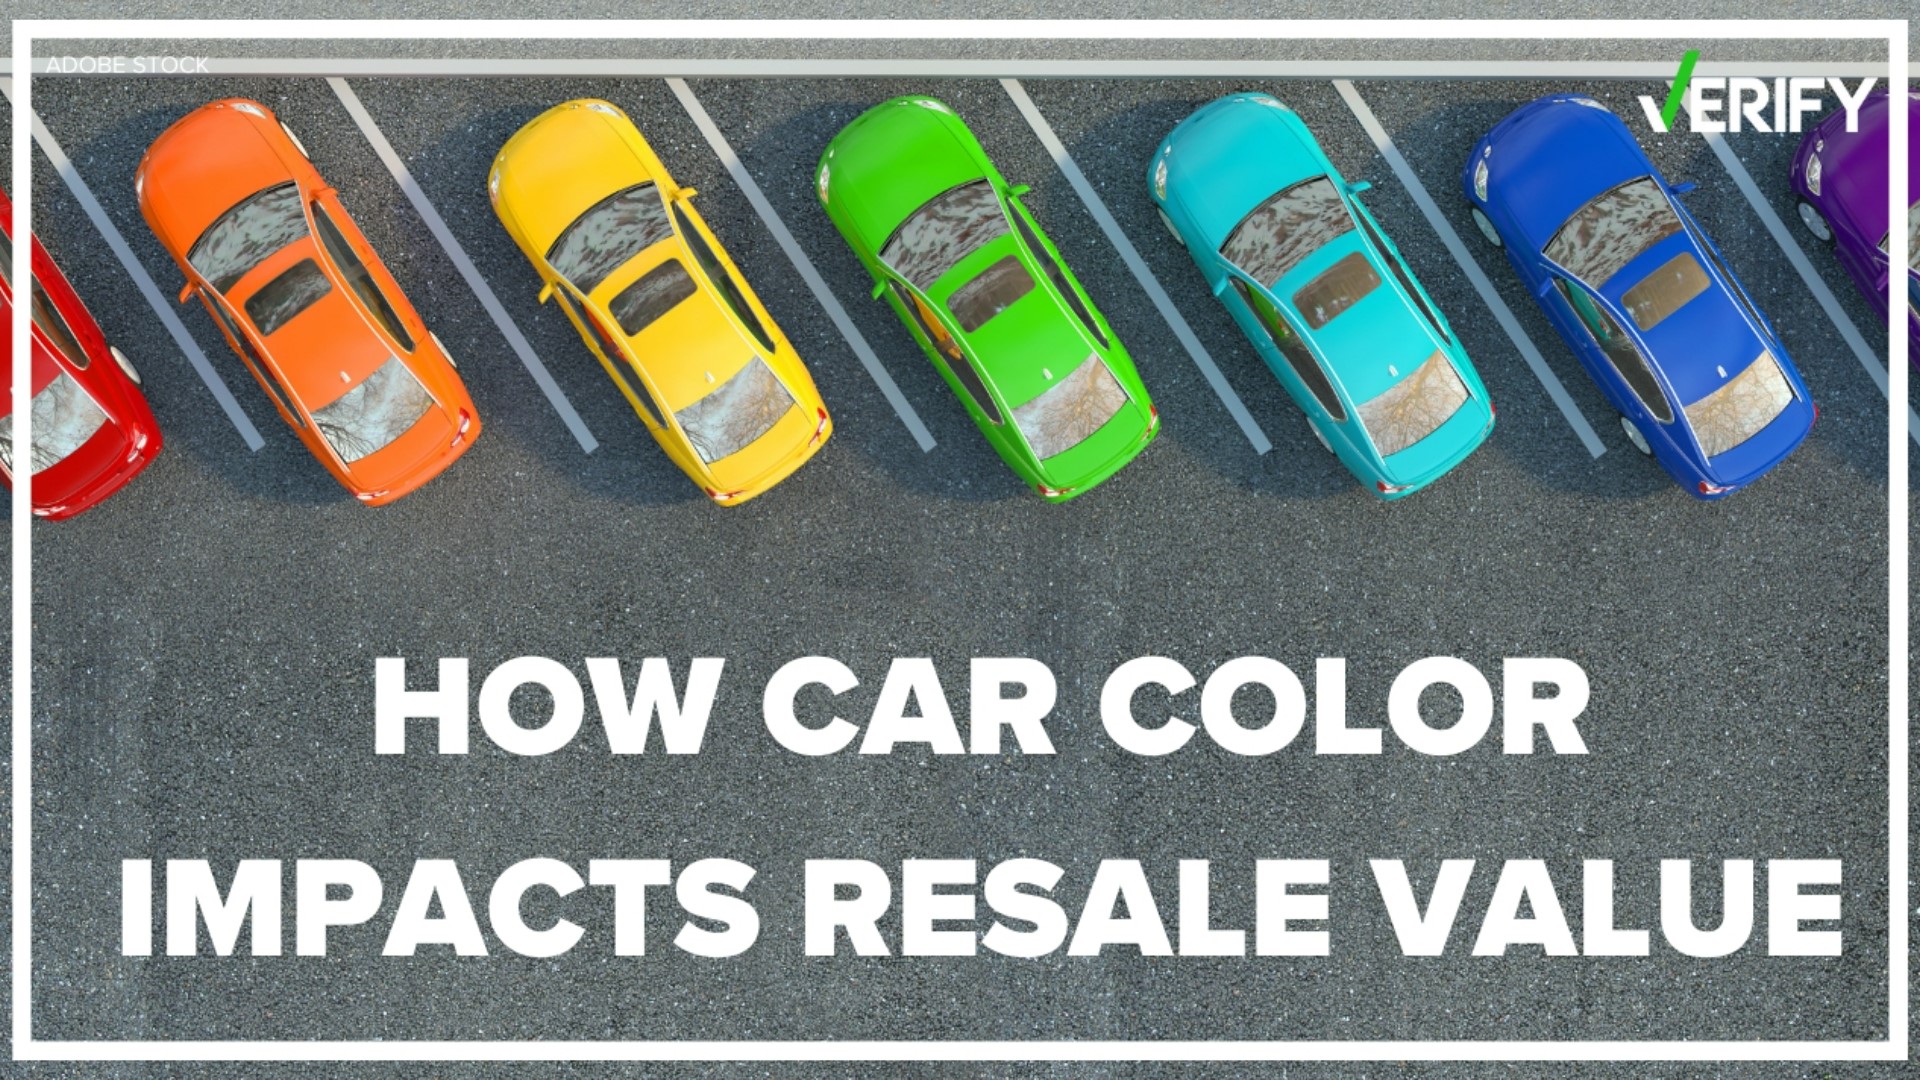 These car colors maintain their value best over 3 years